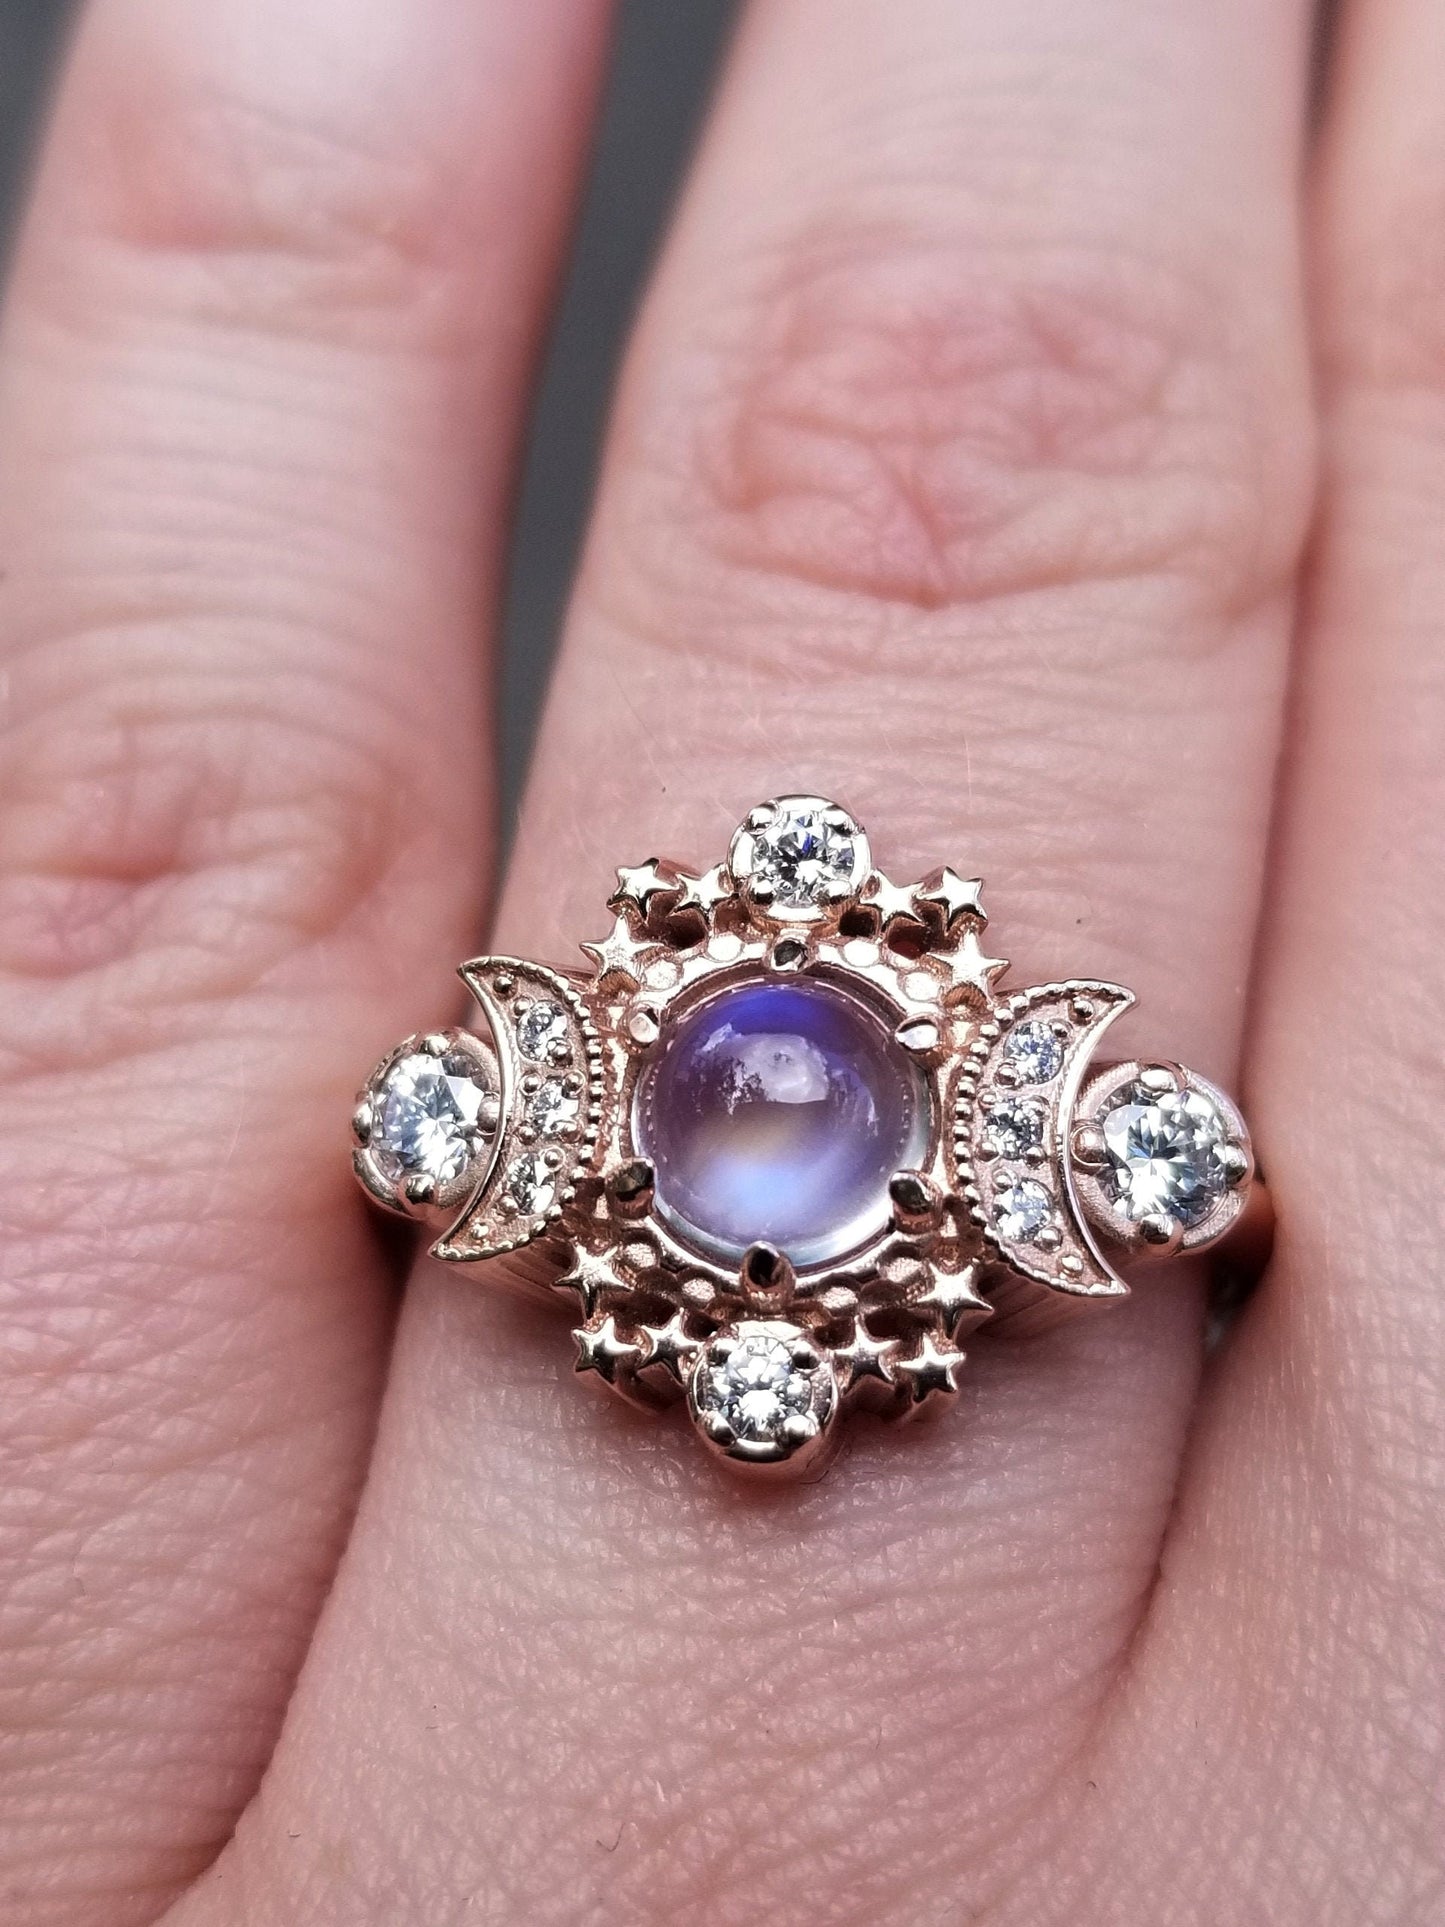 Cosmos Moonstone and Diamond Celestial Engagement Ring - Lunar Boho Rose Gold Moon Ring